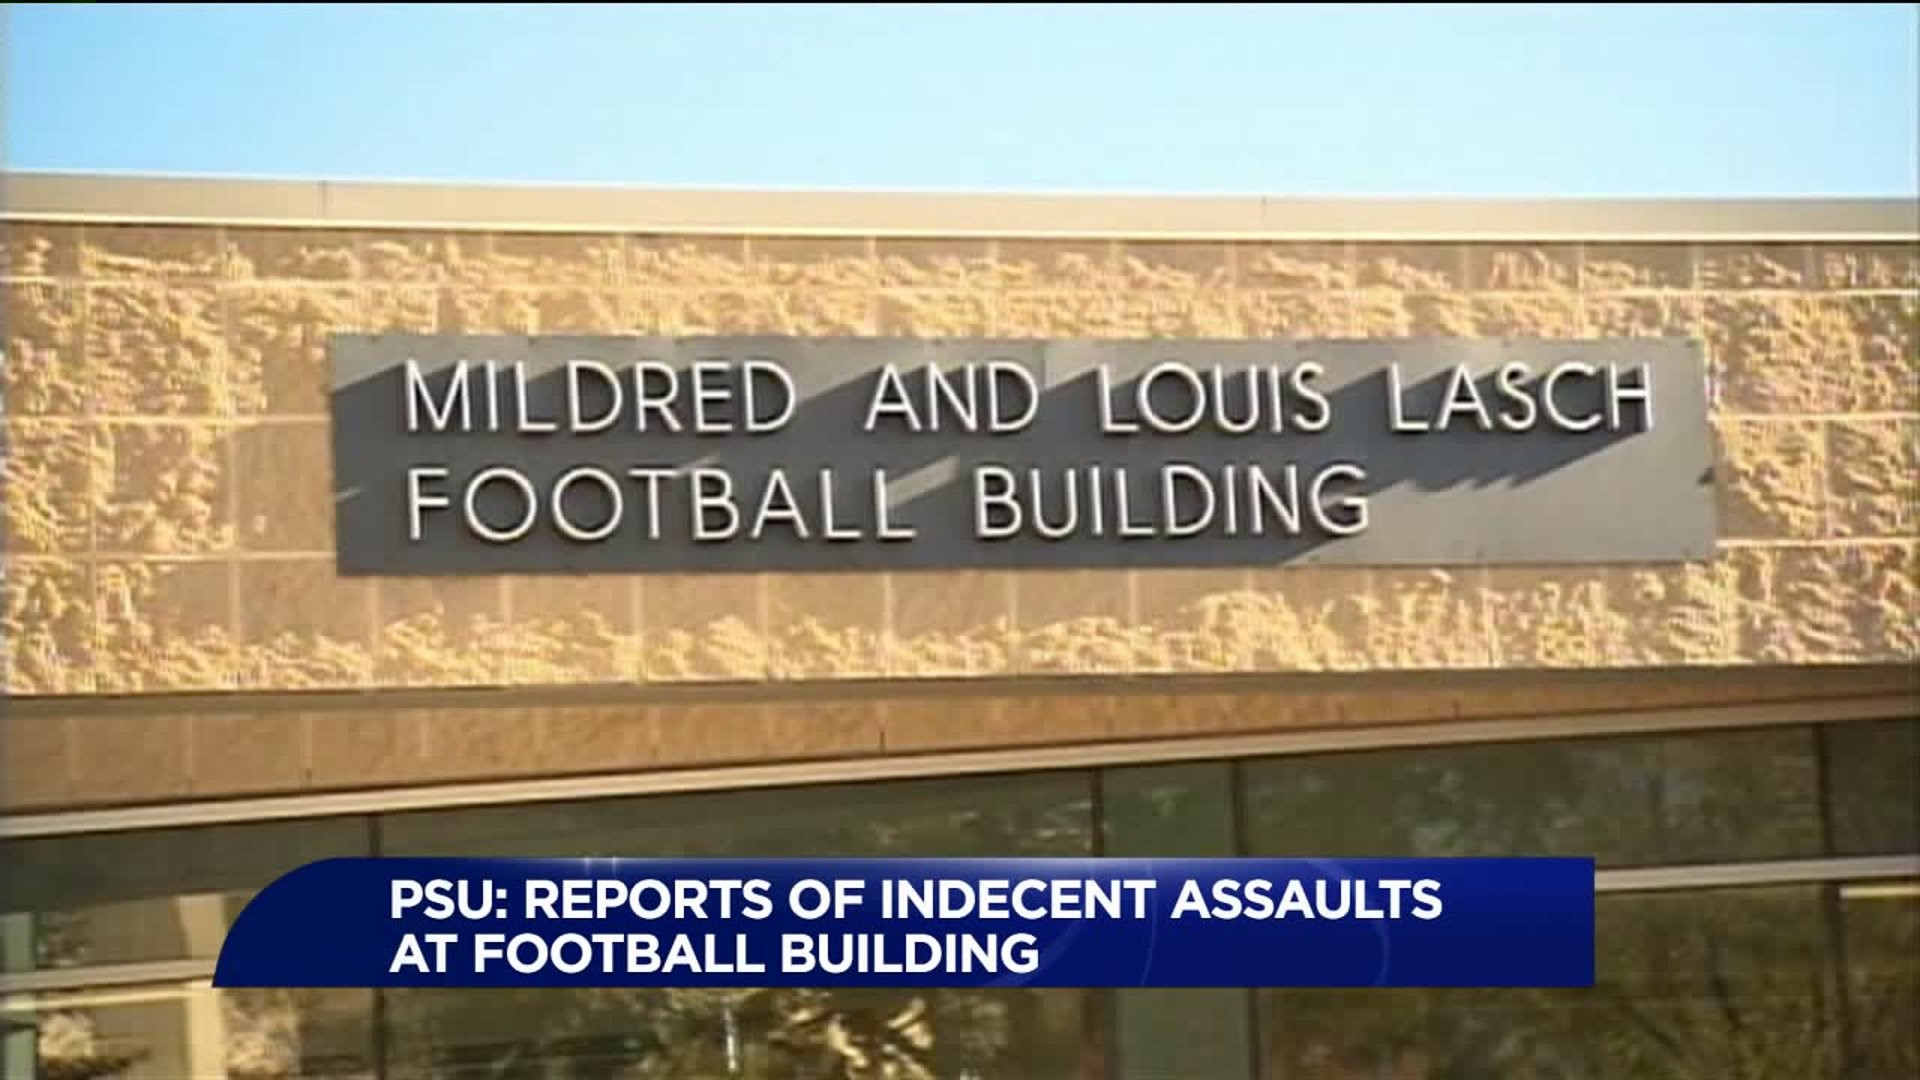 PSU Warns Students of Indecent Assaults at Football Building on Campus